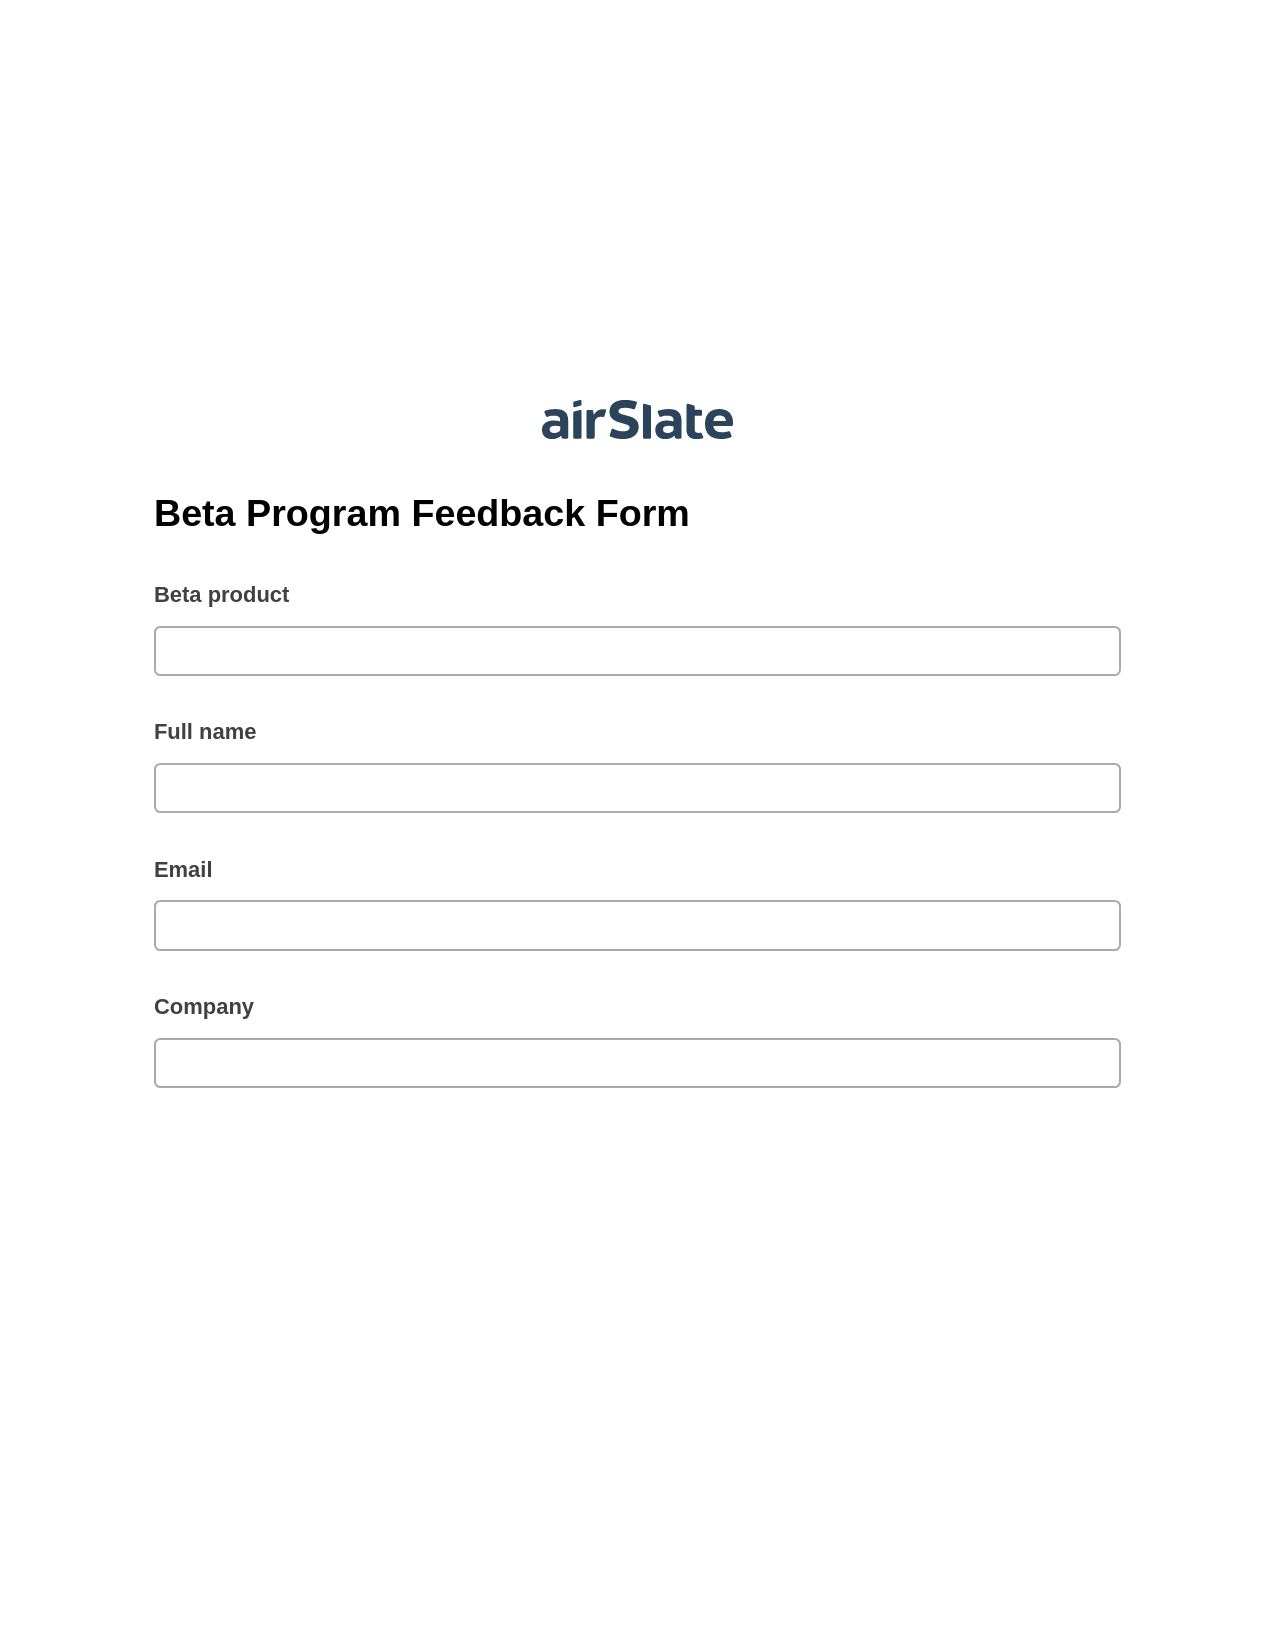 Beta Program Feedback Form Pre-fill from NetSuite Records Bot, Reminder Bot, Export to Formstack Documents Bot